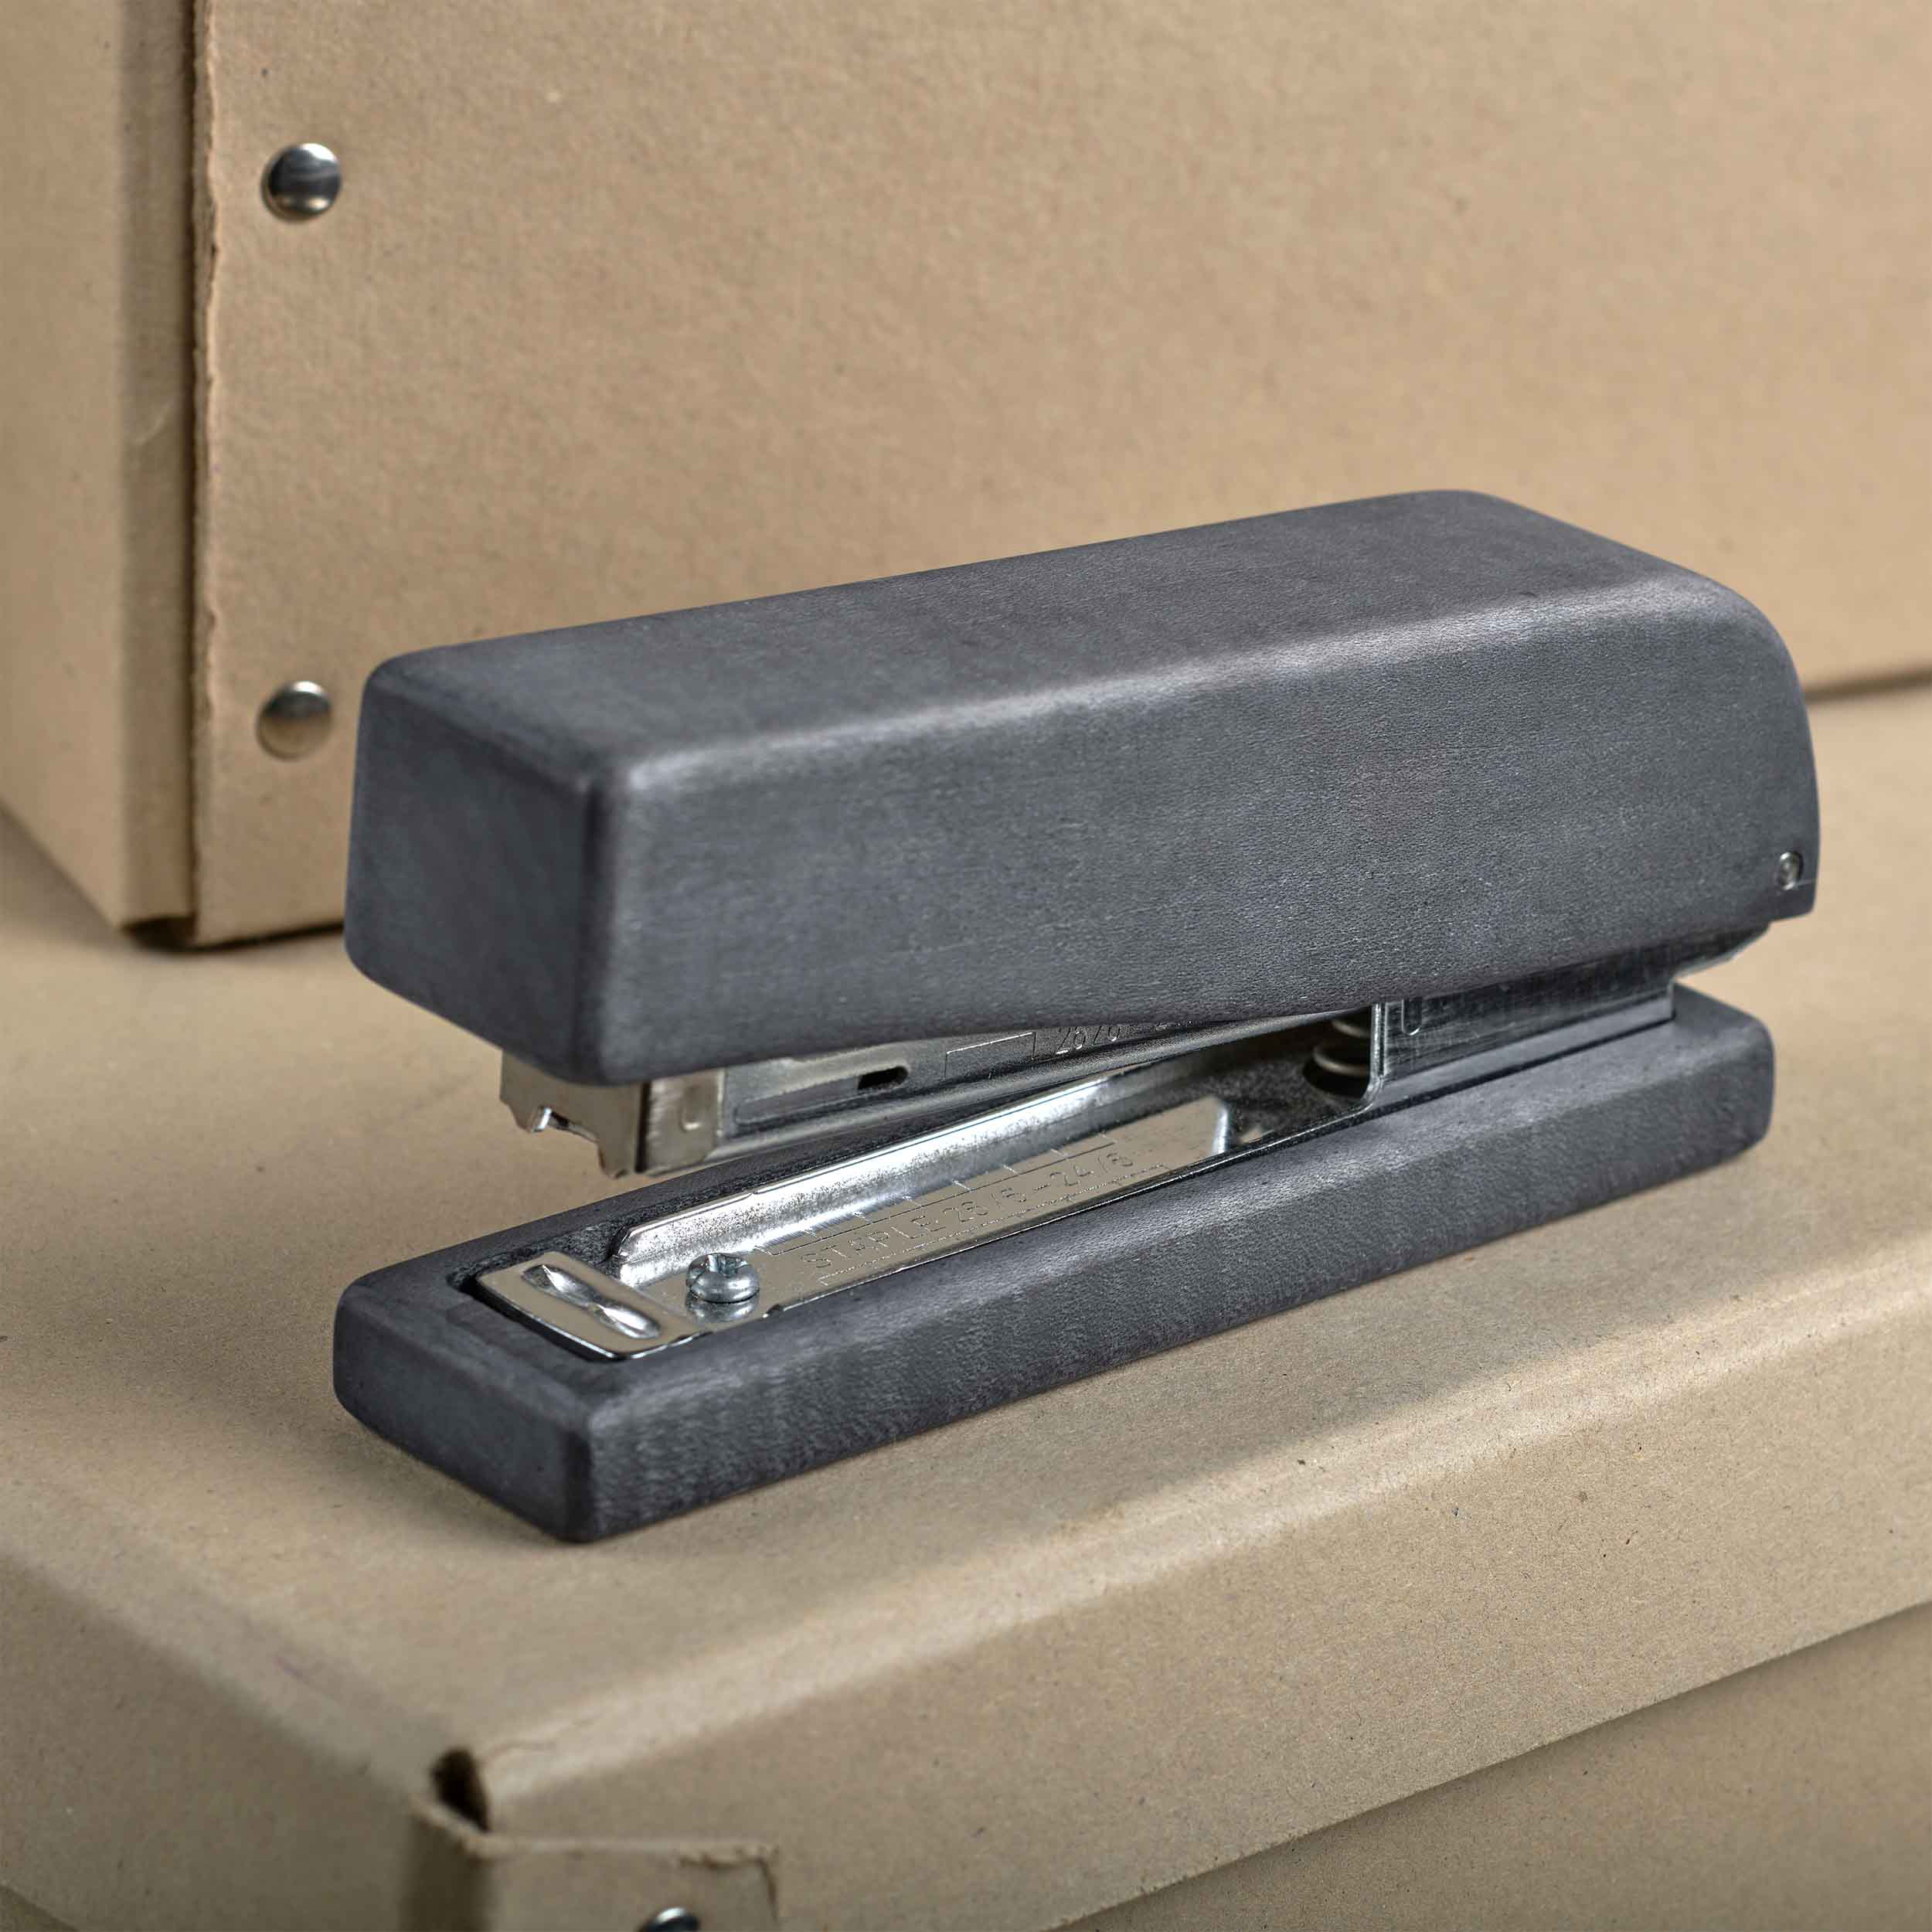 Cokala™ stapler - Black | Image 1 | Premium Desk Accessory from the Cokala collection | made with Sycamore for long lasting use | texxture